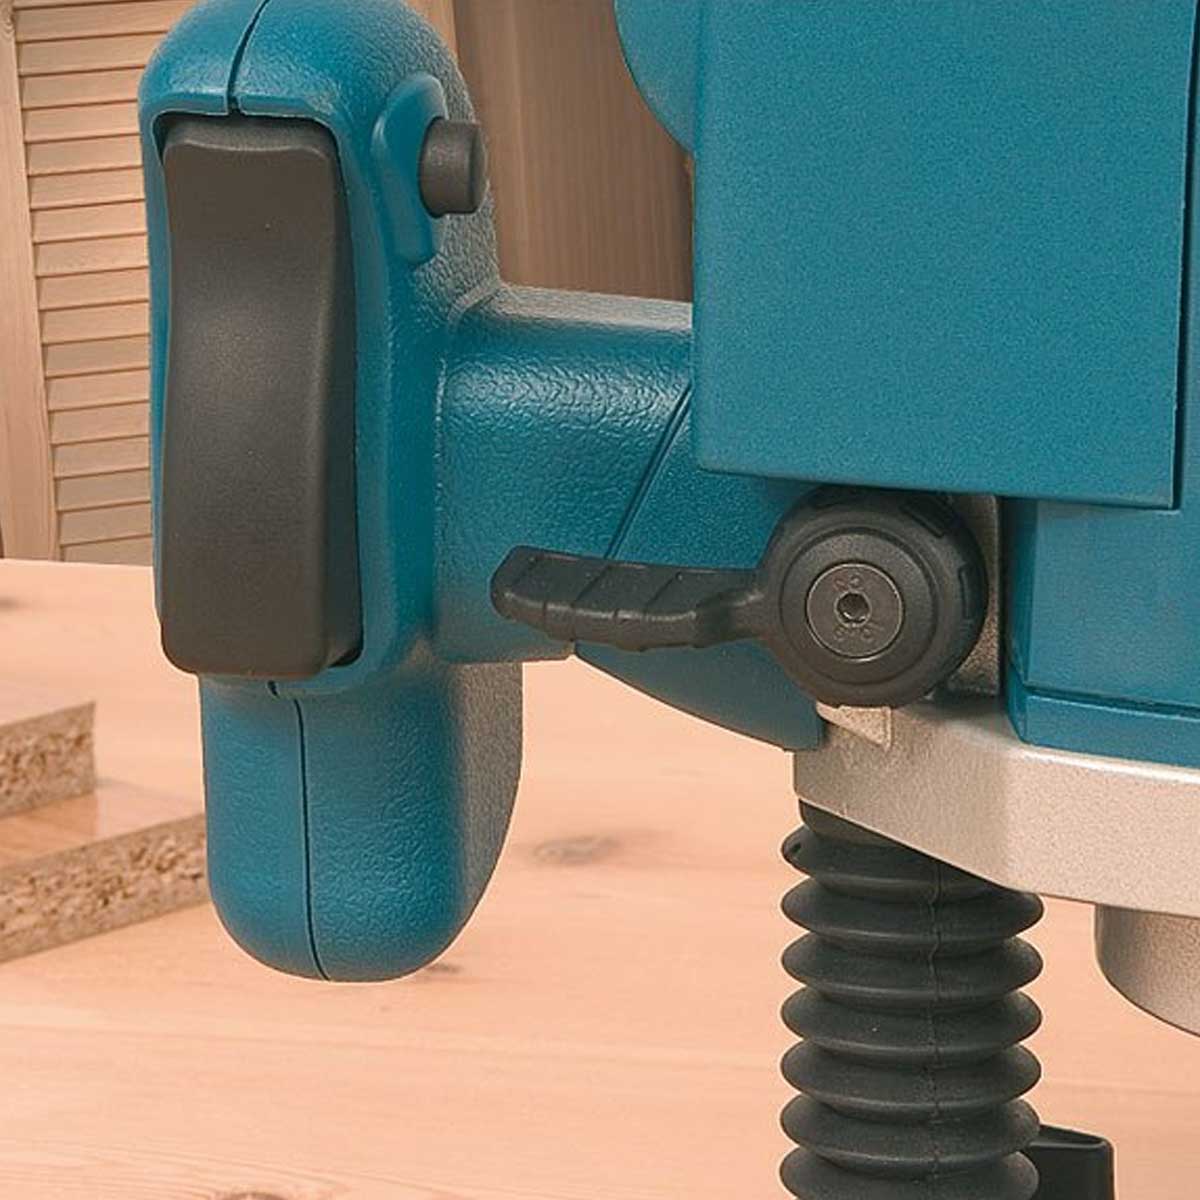 European Hand Router Manufacturers, Suppliers in Noida